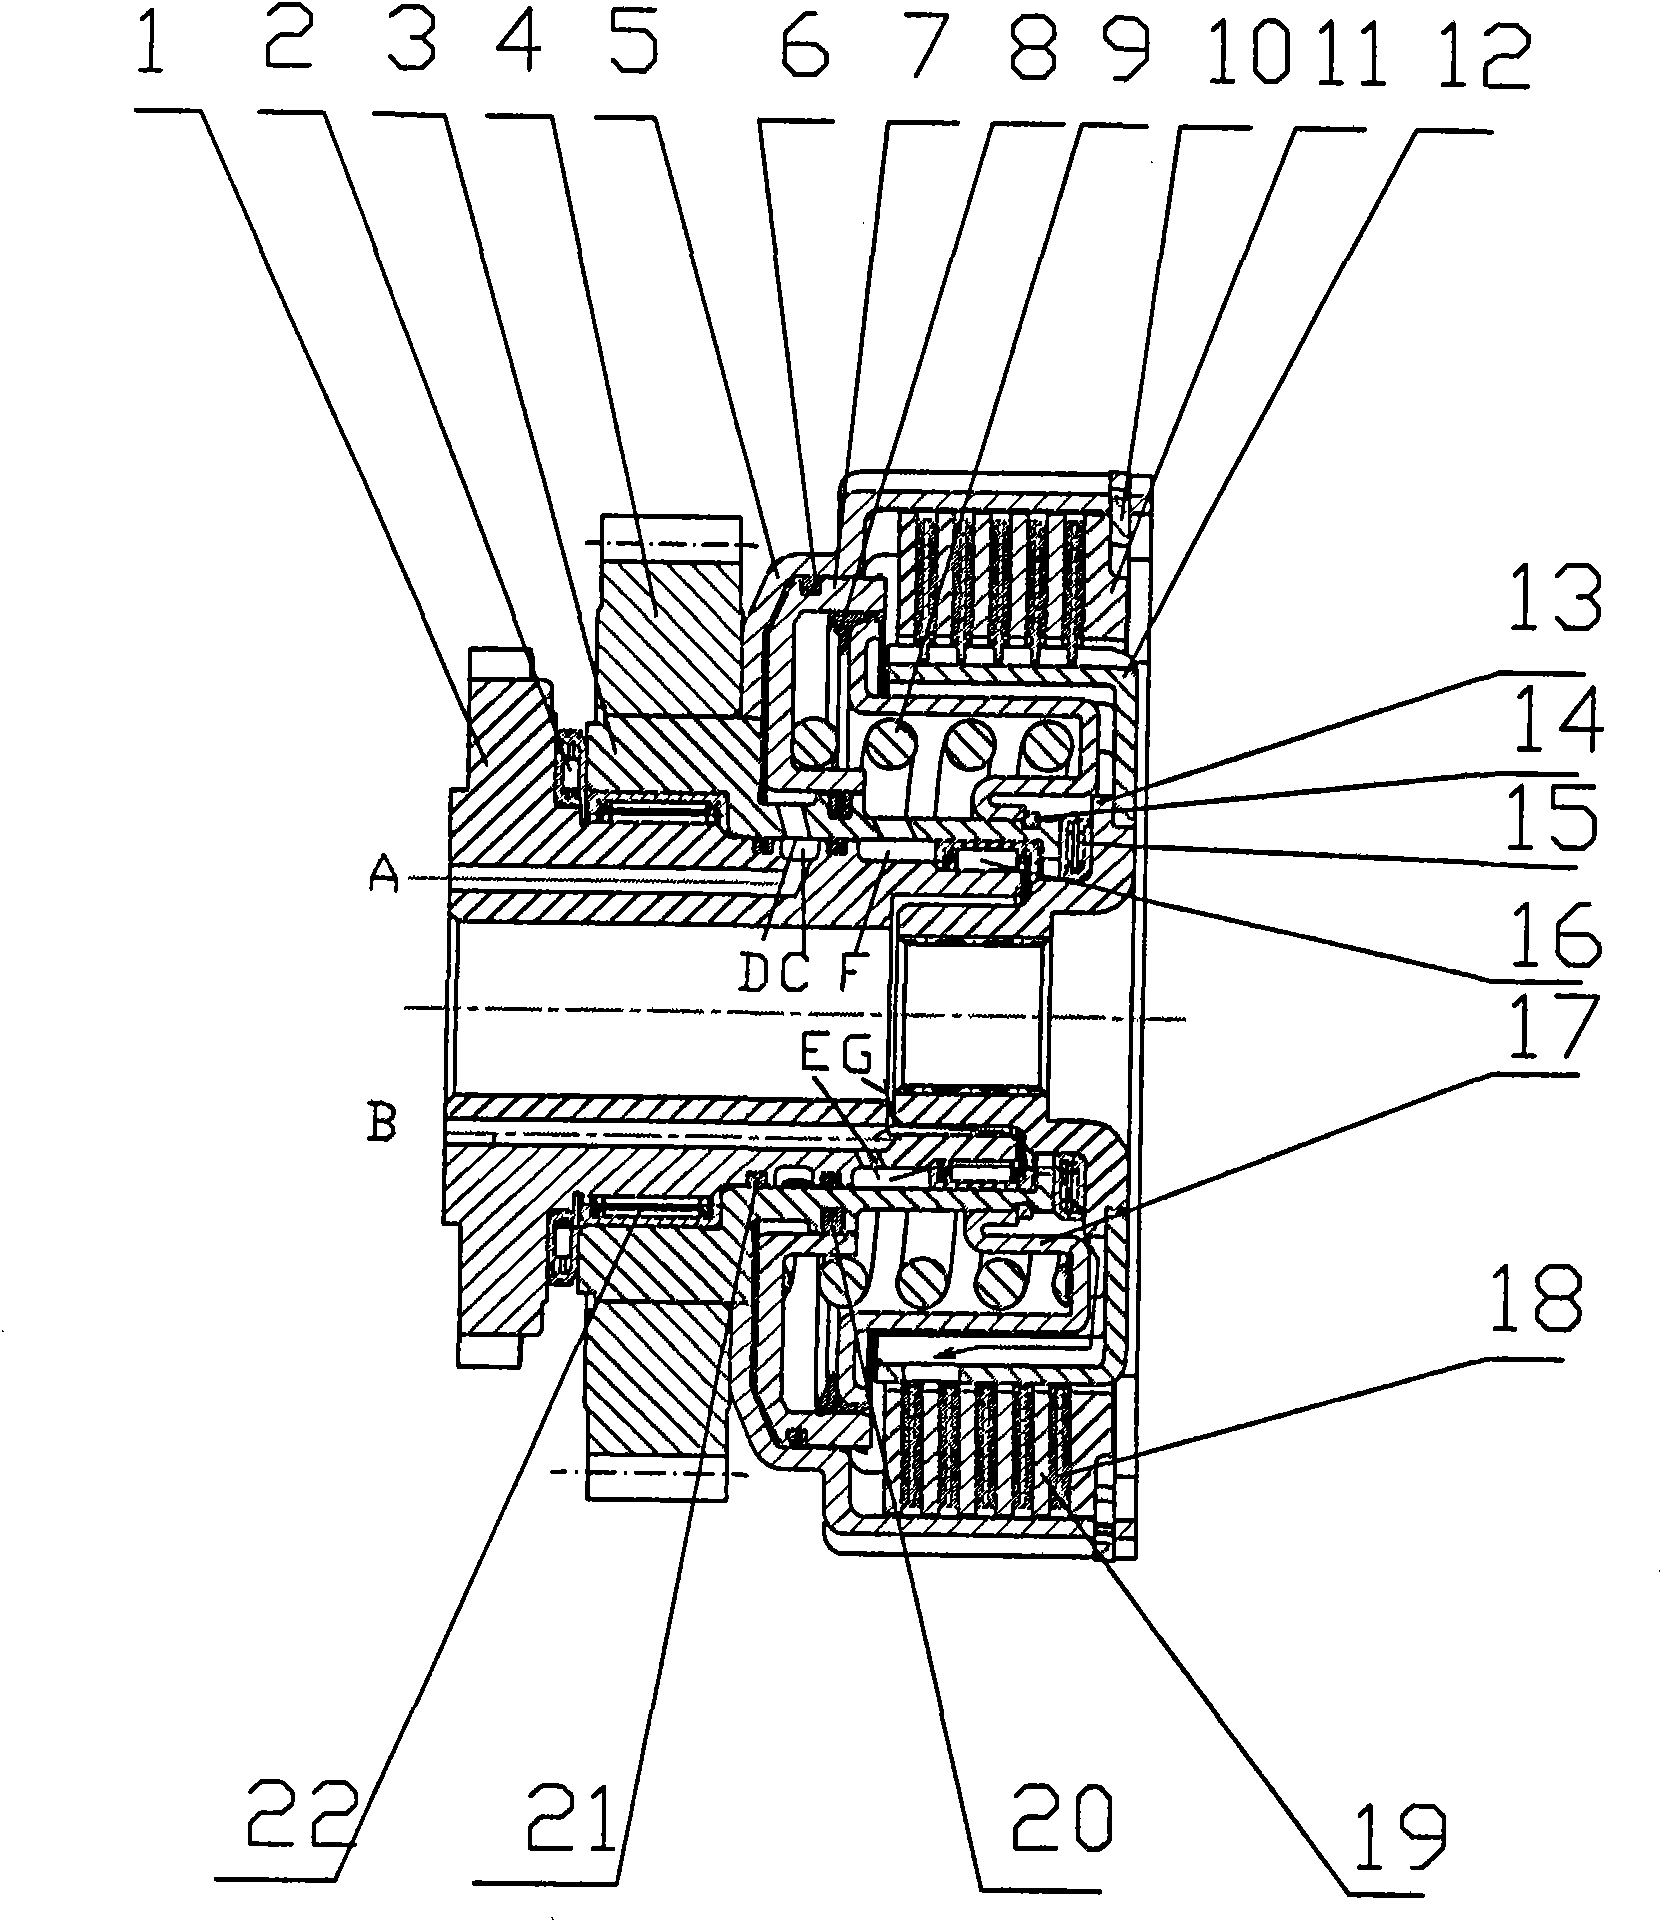 Dual-clutch automated transmission